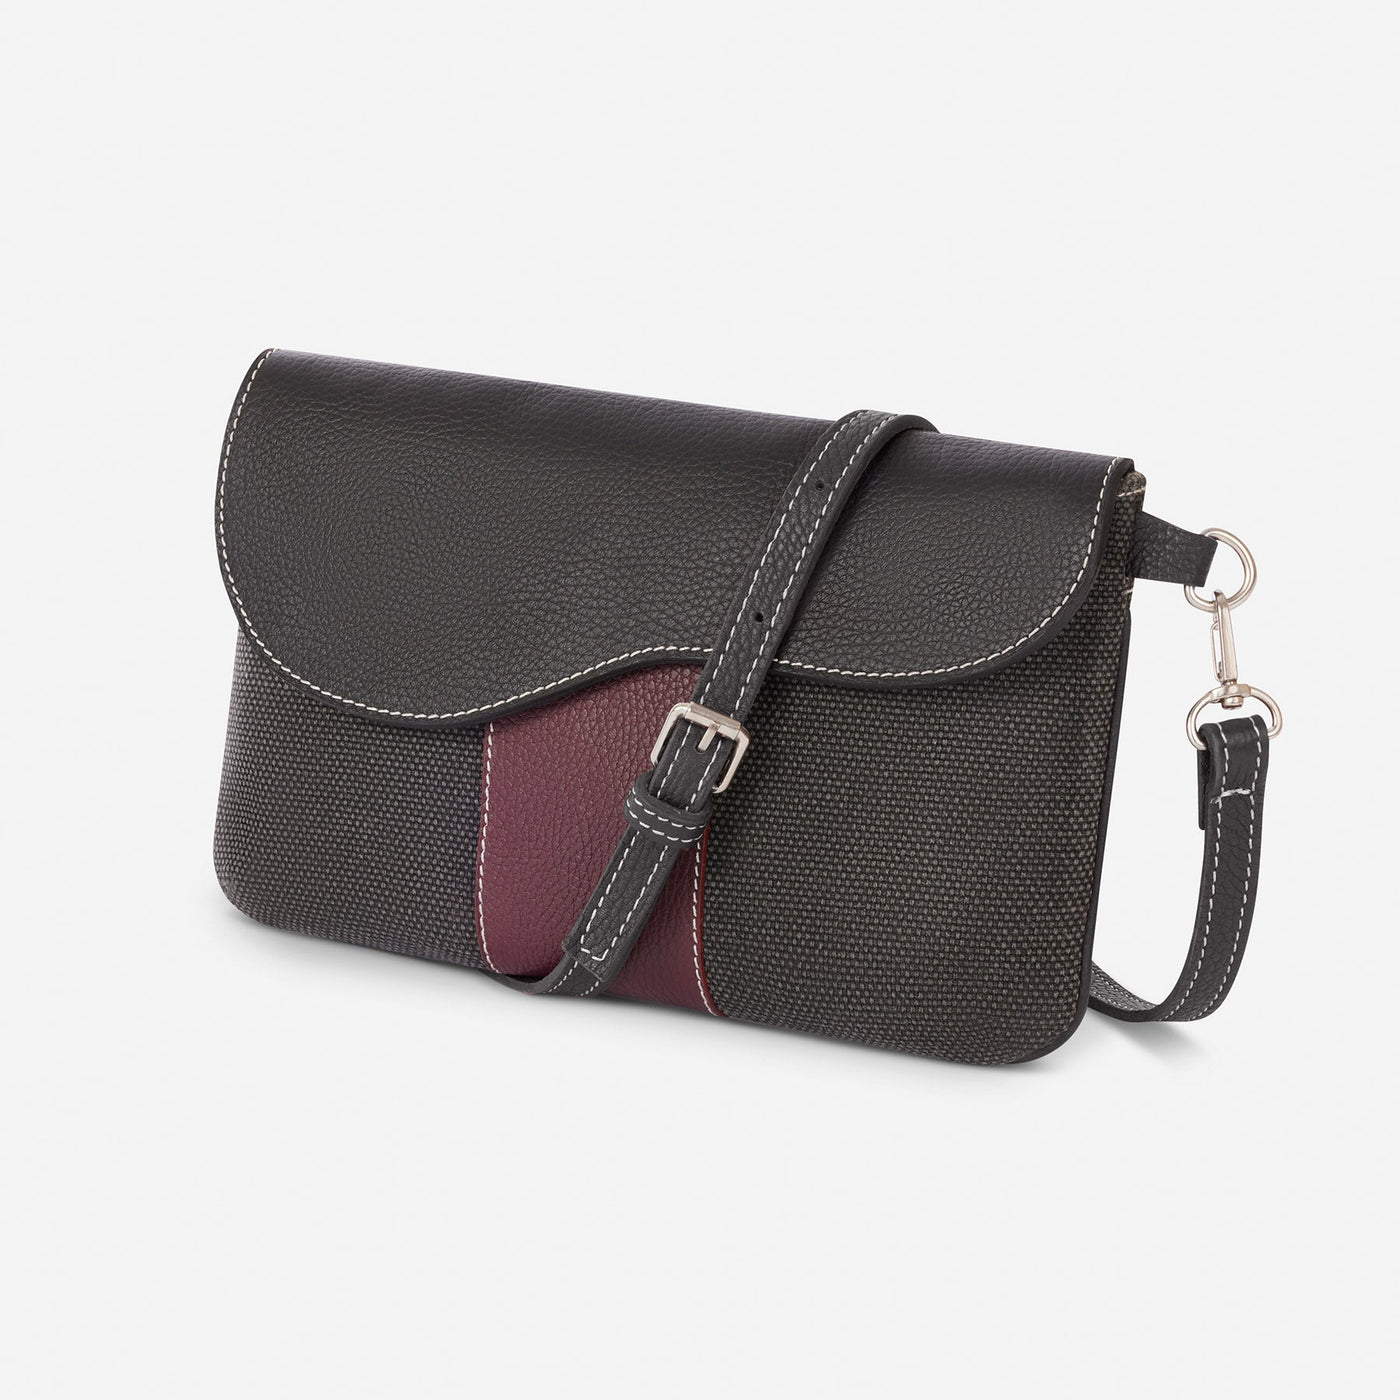 Paddock Crossbody in Vintage Canvas by Oughton